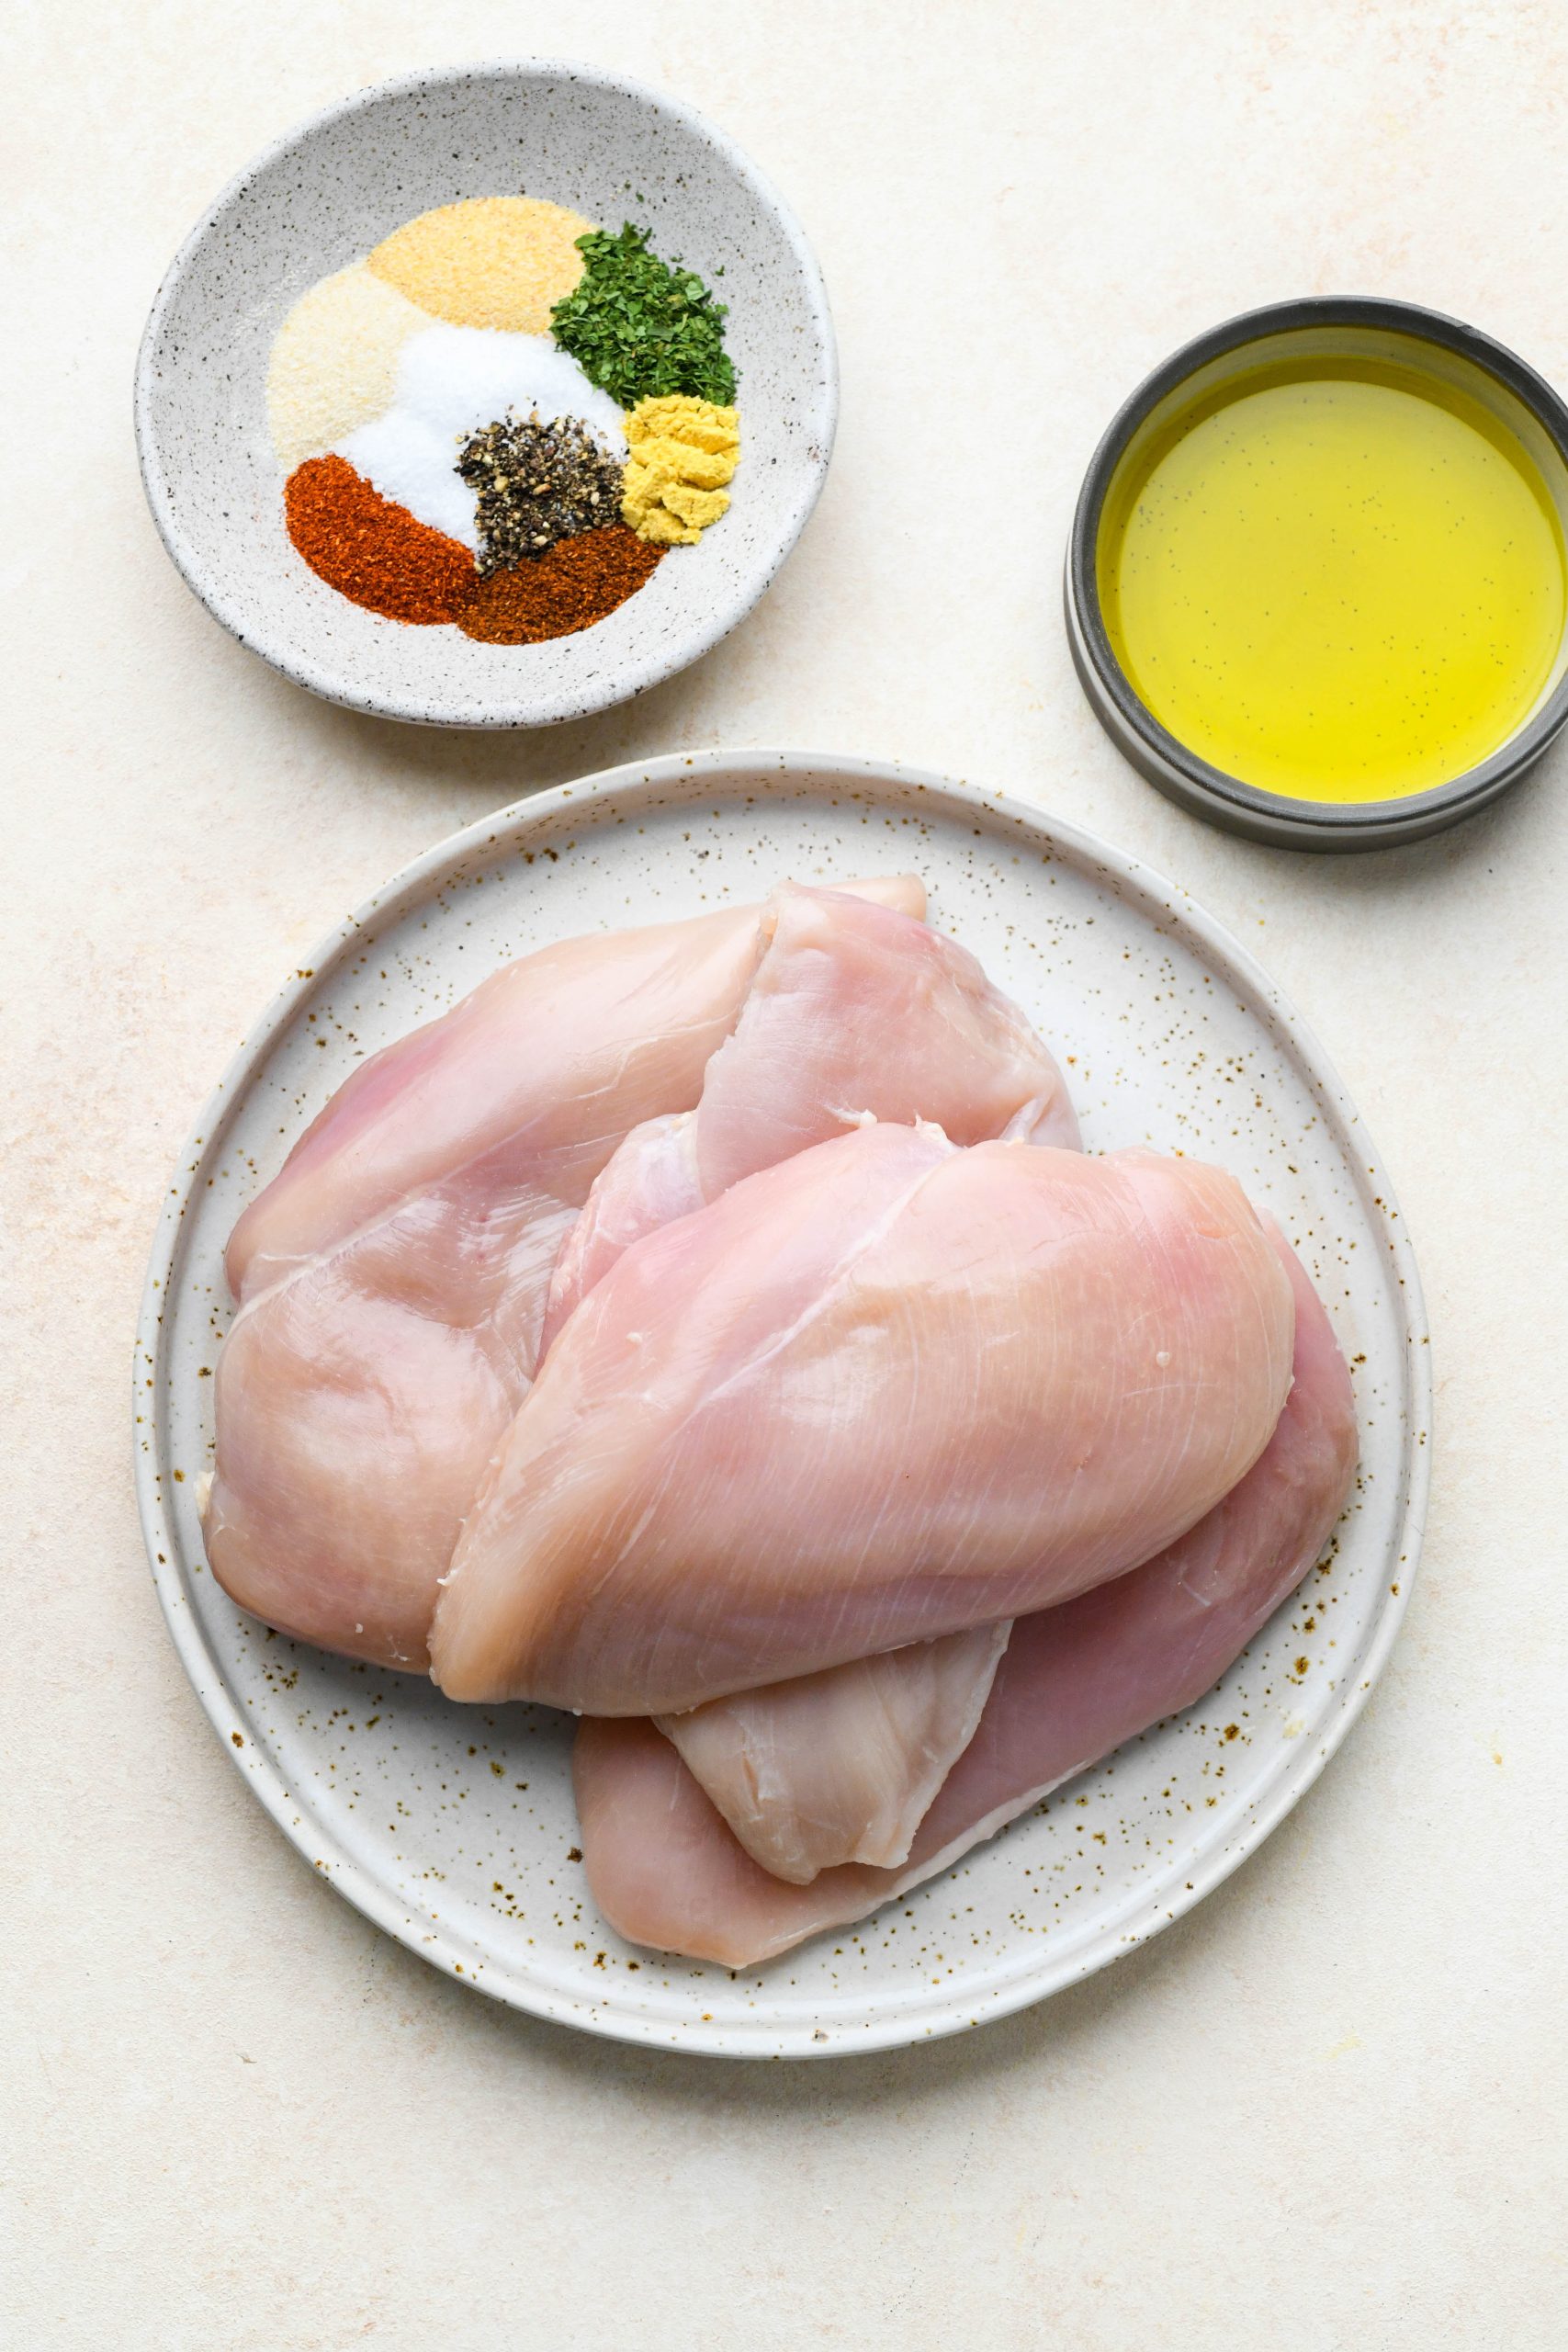 Ingredients for baked chicken breast recipe on various ceramics, on a light cream colored background.